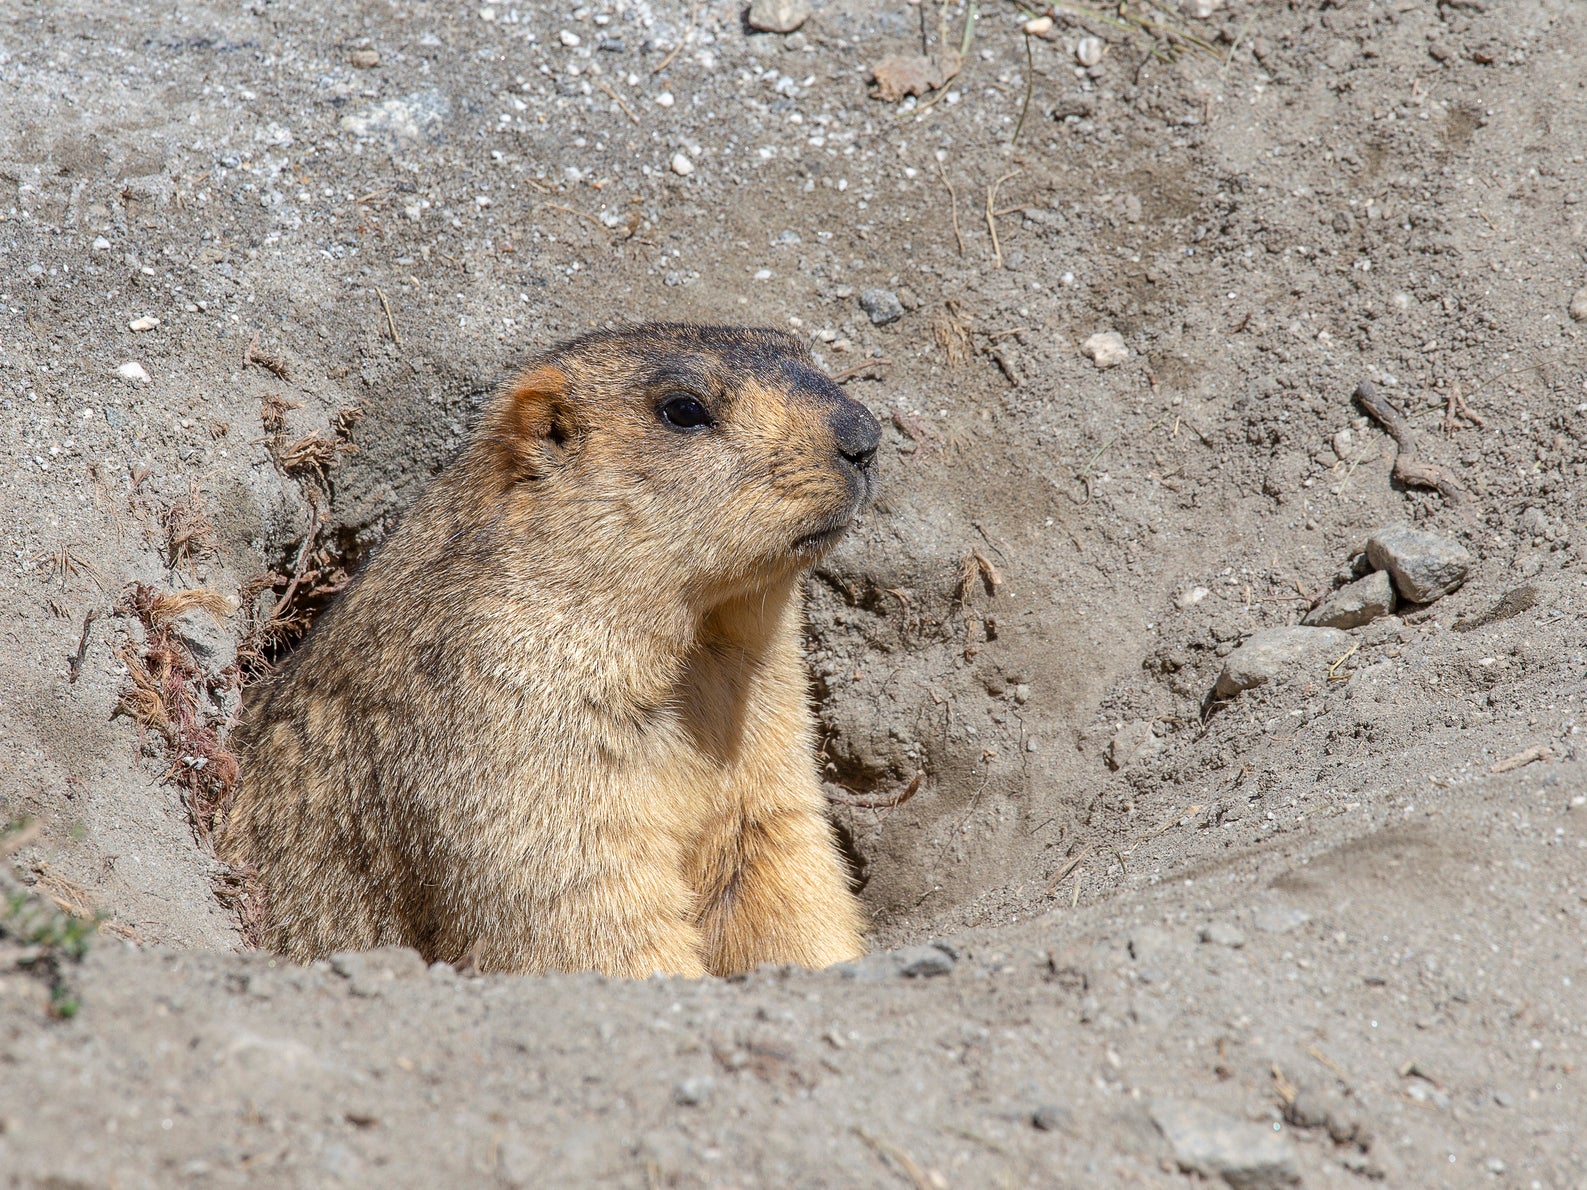 Two plague cases have been linked to marmots in Mongolia